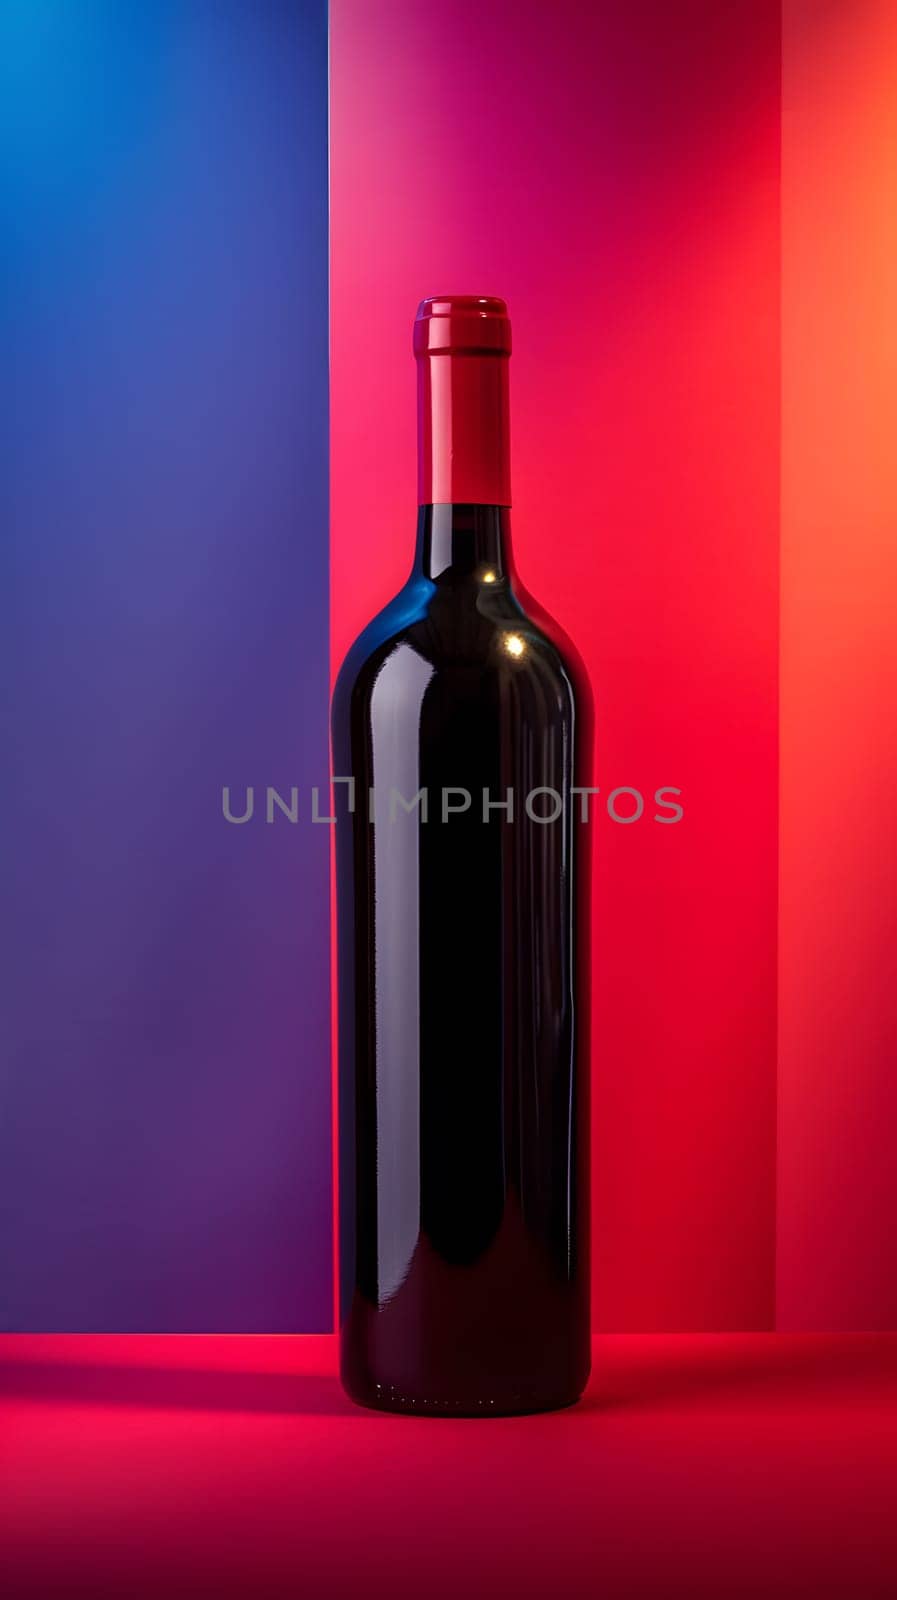 A red wine bottle rests on a vibrant table, ready to be enjoyed by Nadtochiy